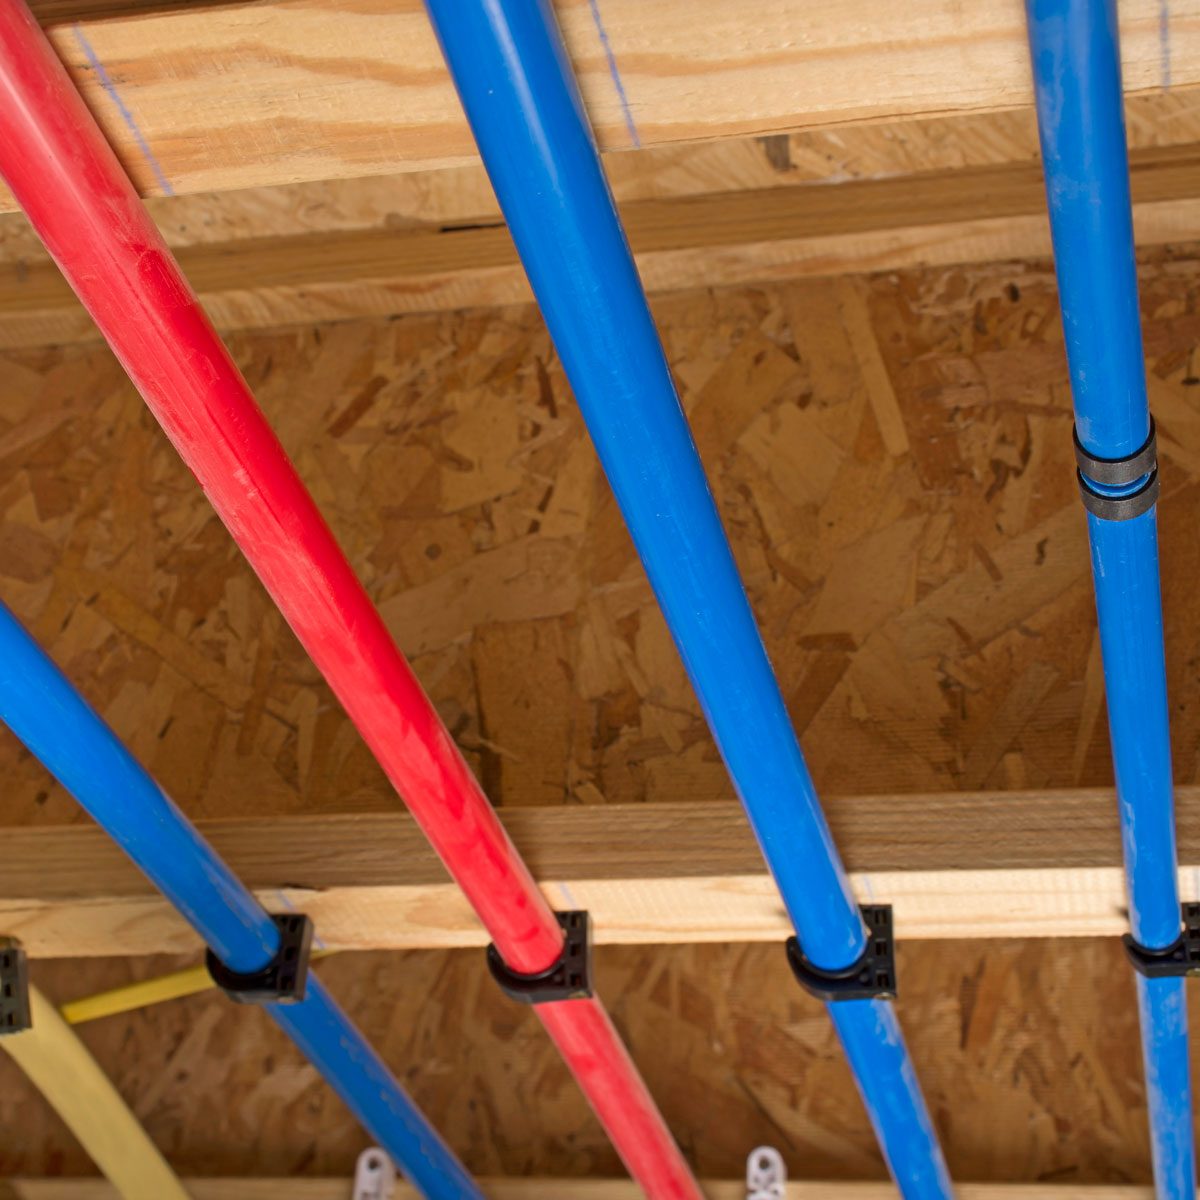 What You Need to Know About PEX Plumbing Pipe